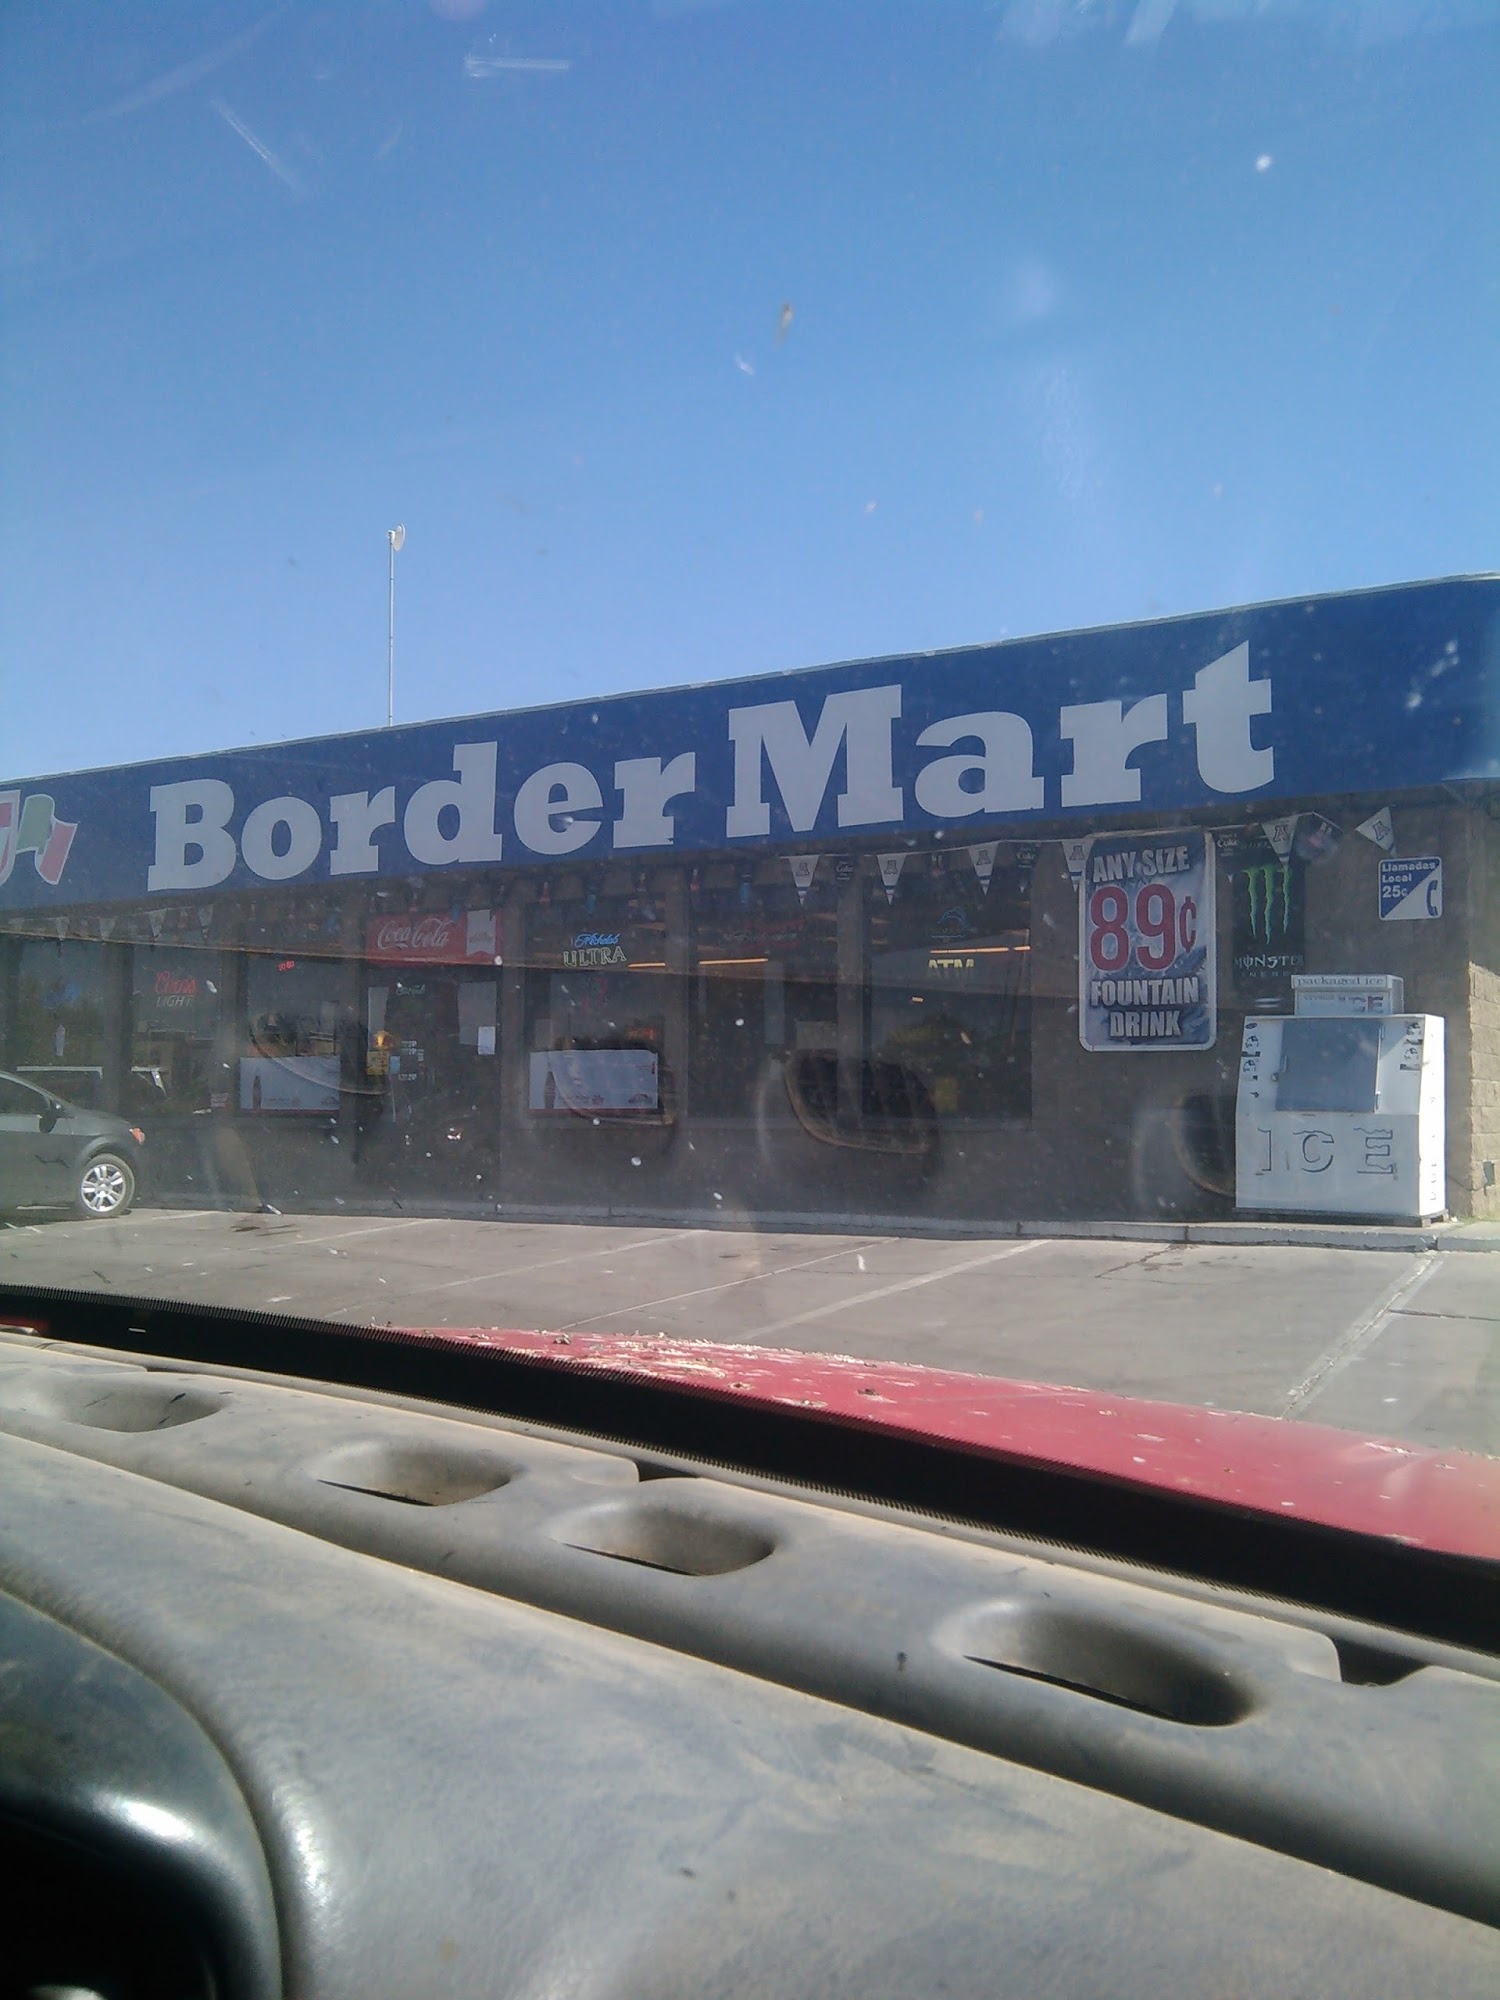 BorderMart District of Mexico